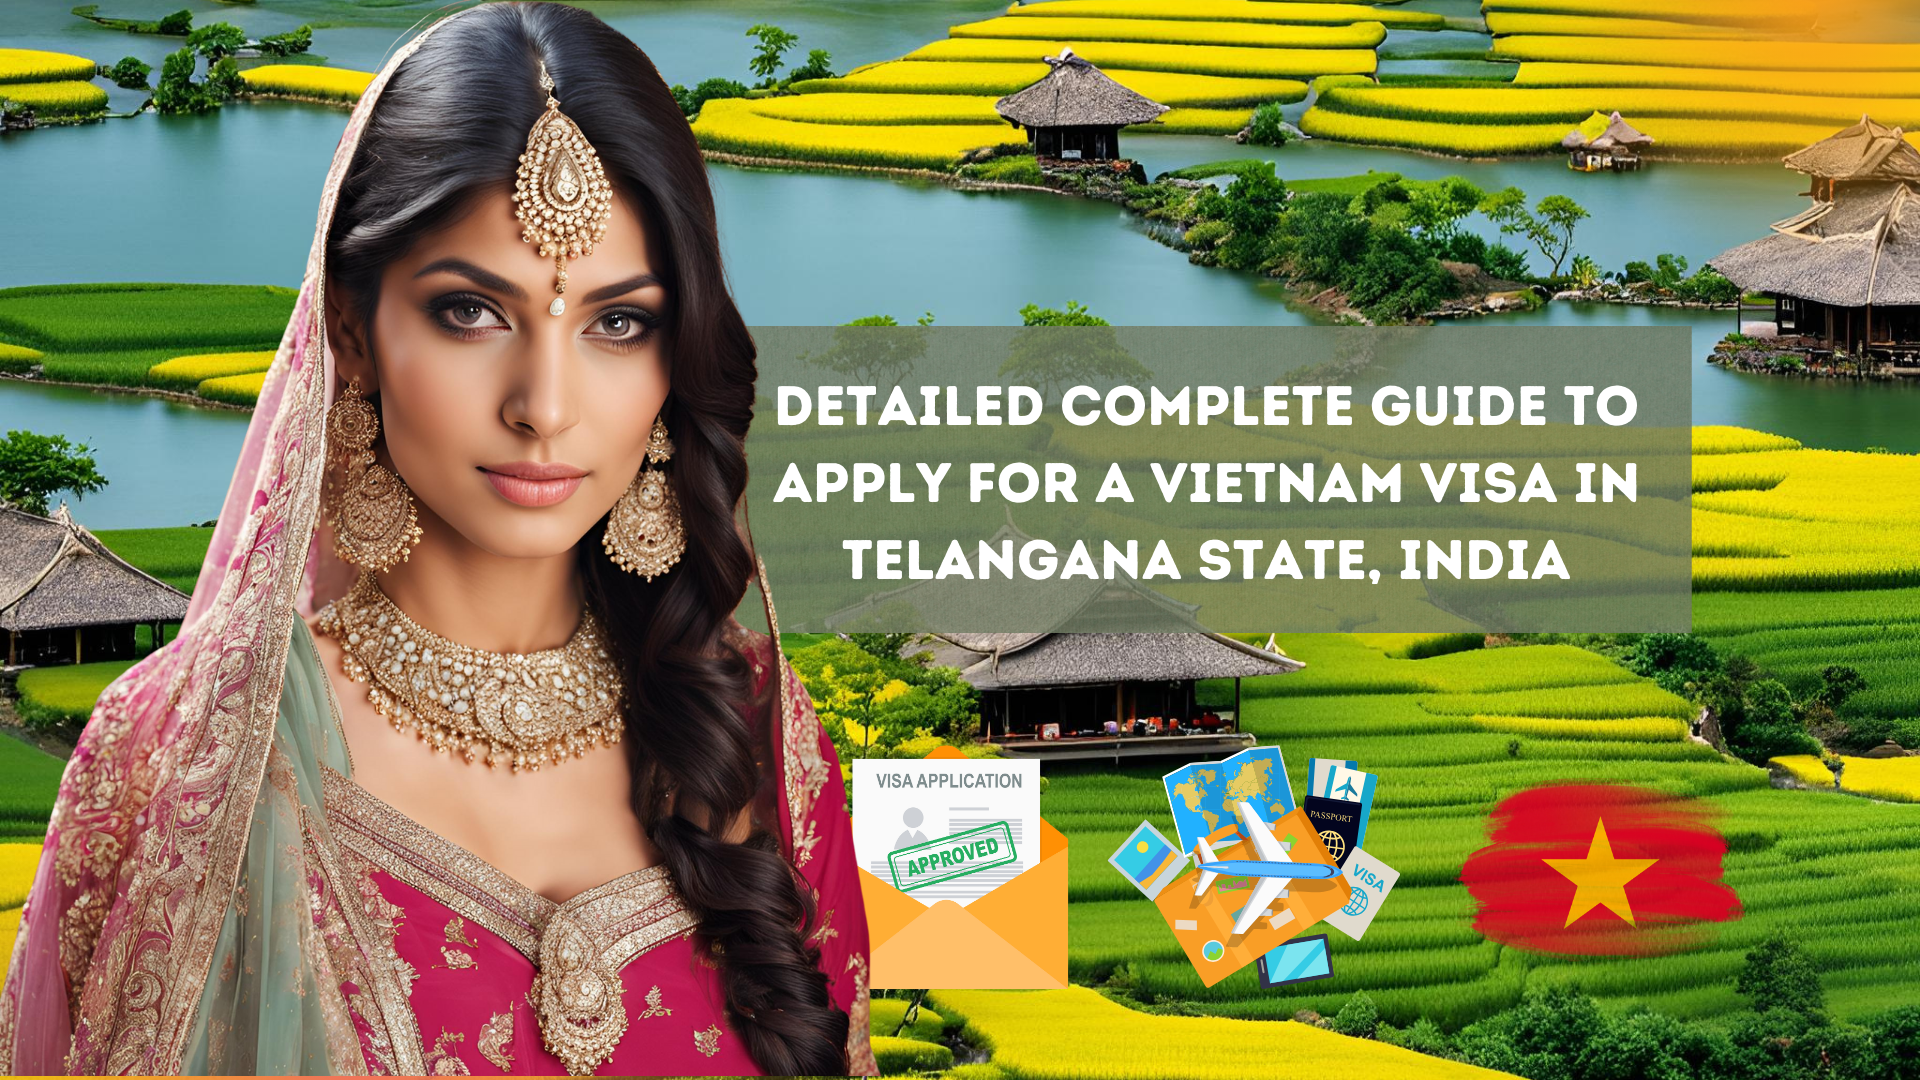 Detailed Complete Guide to Apply for a Vietnam Visa in Telangana State, India